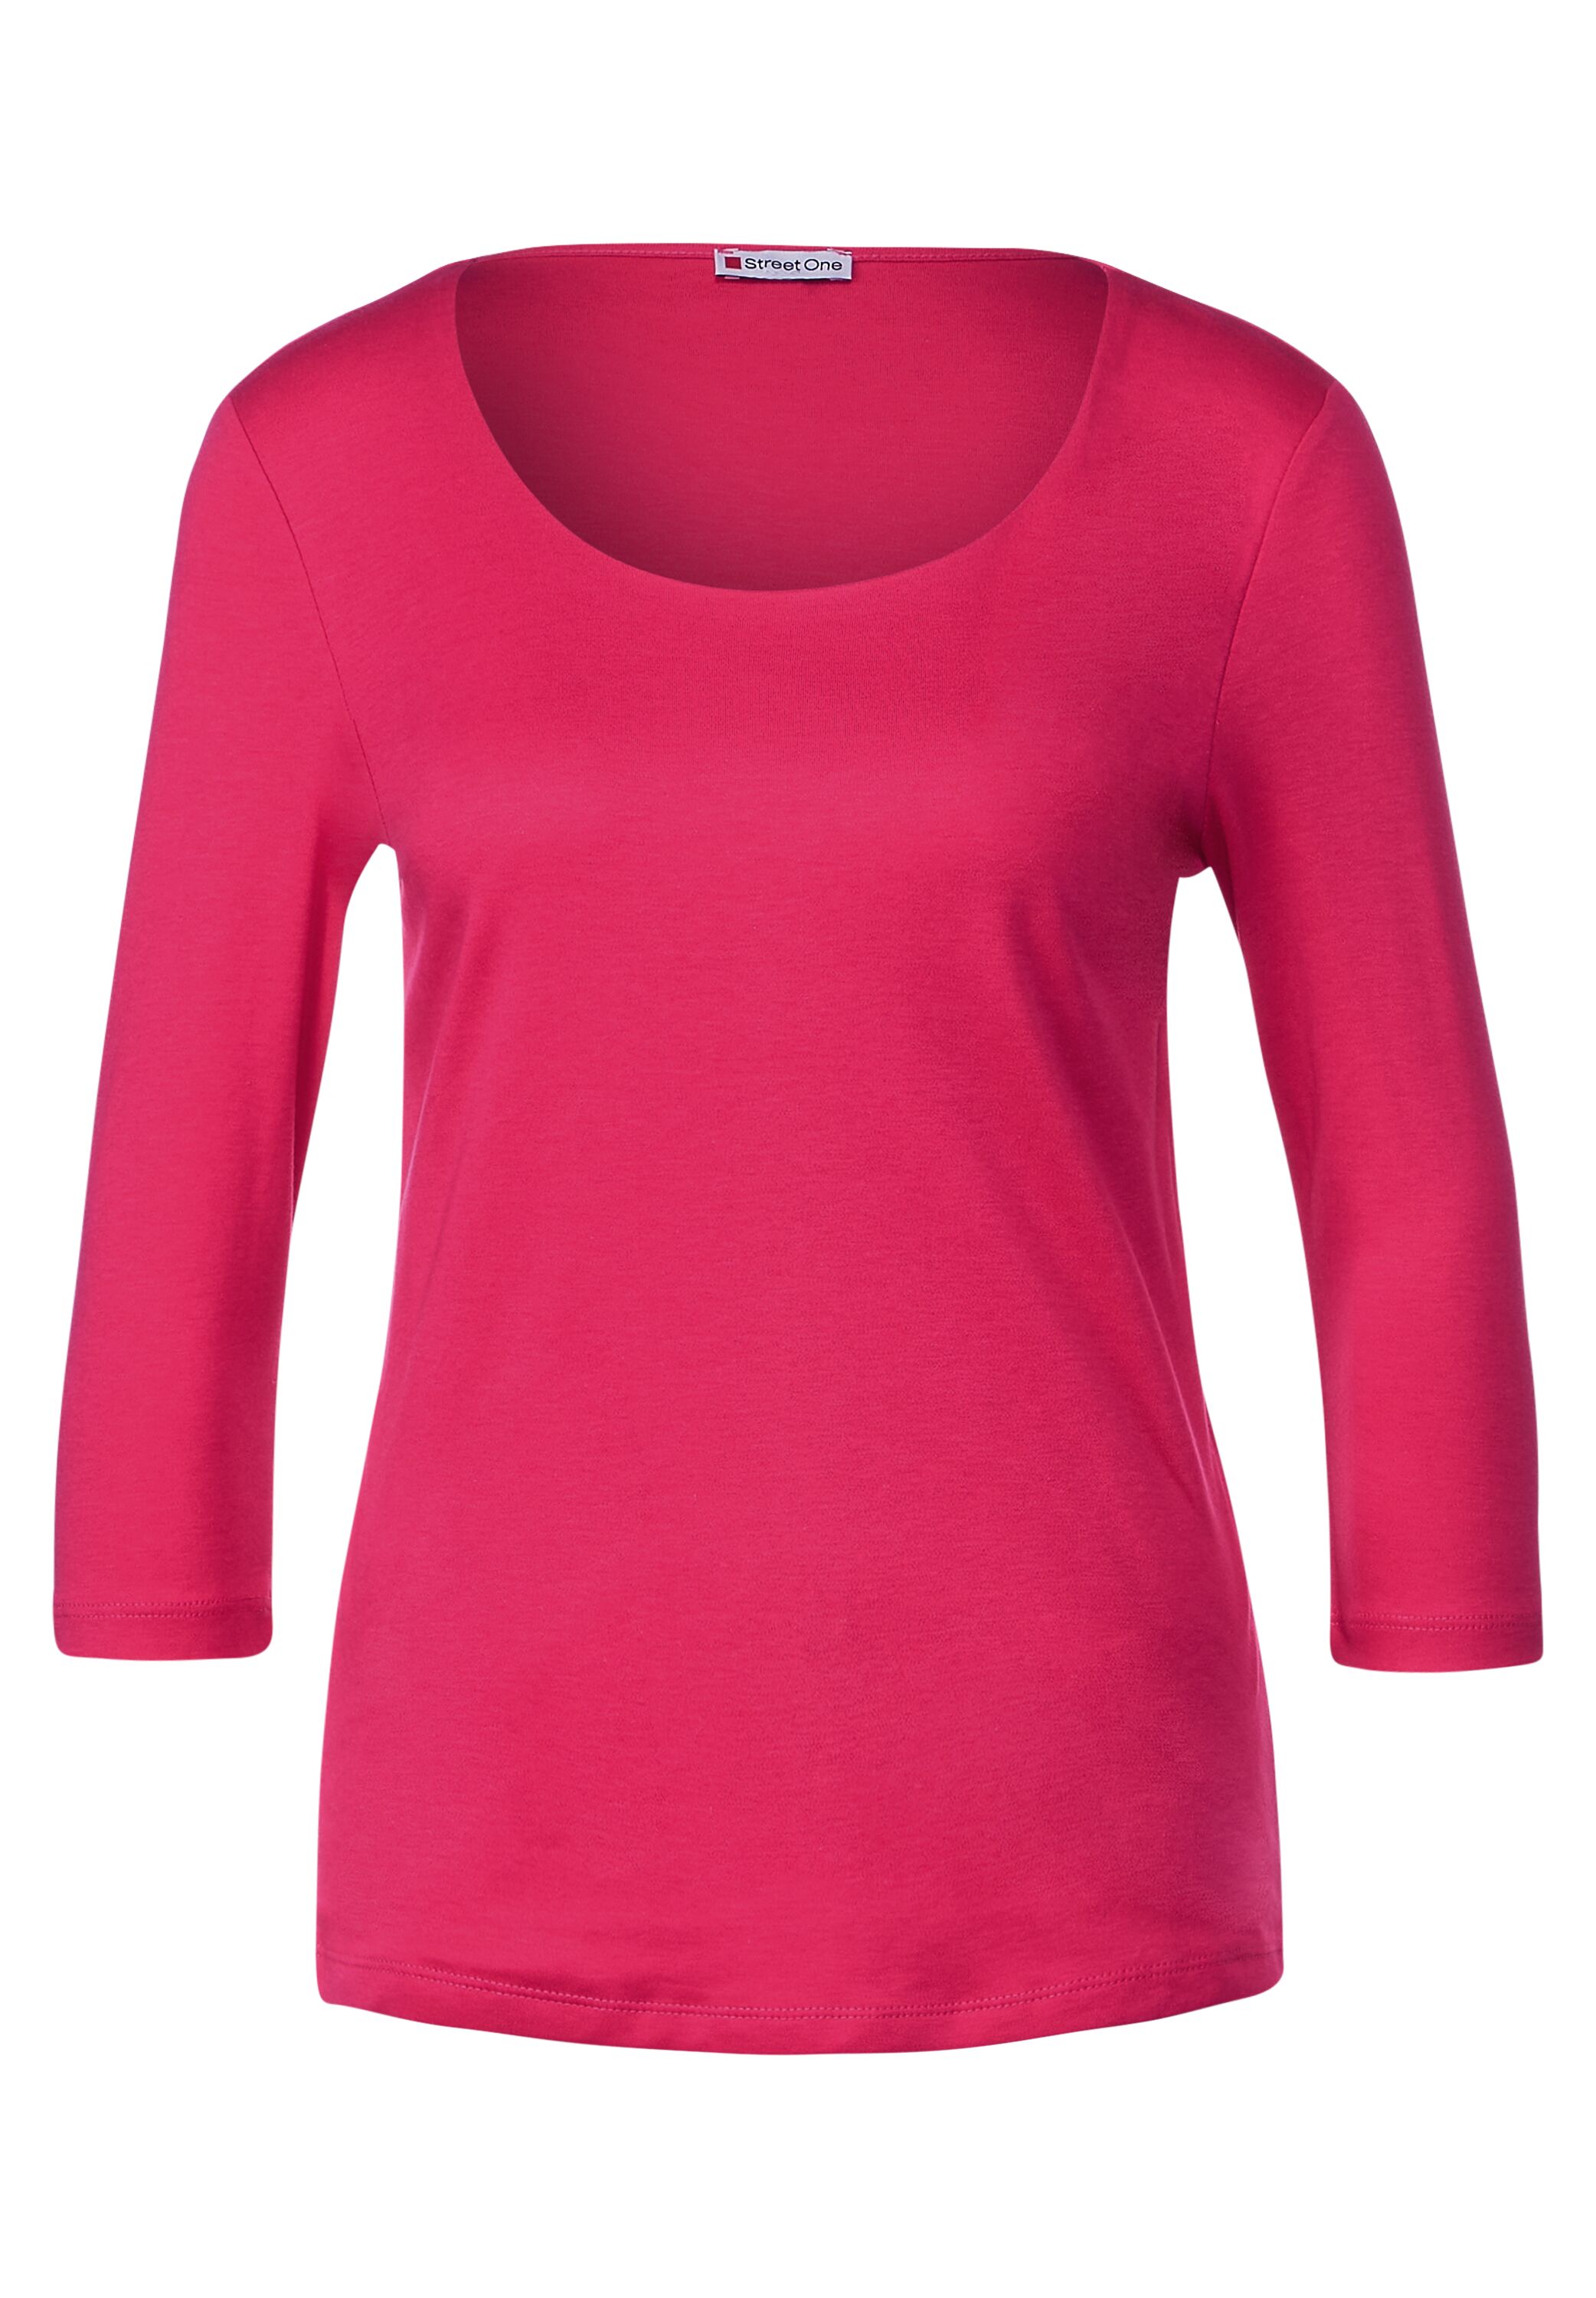 Unifarbe | Street Shirt in coral One blossom | 34